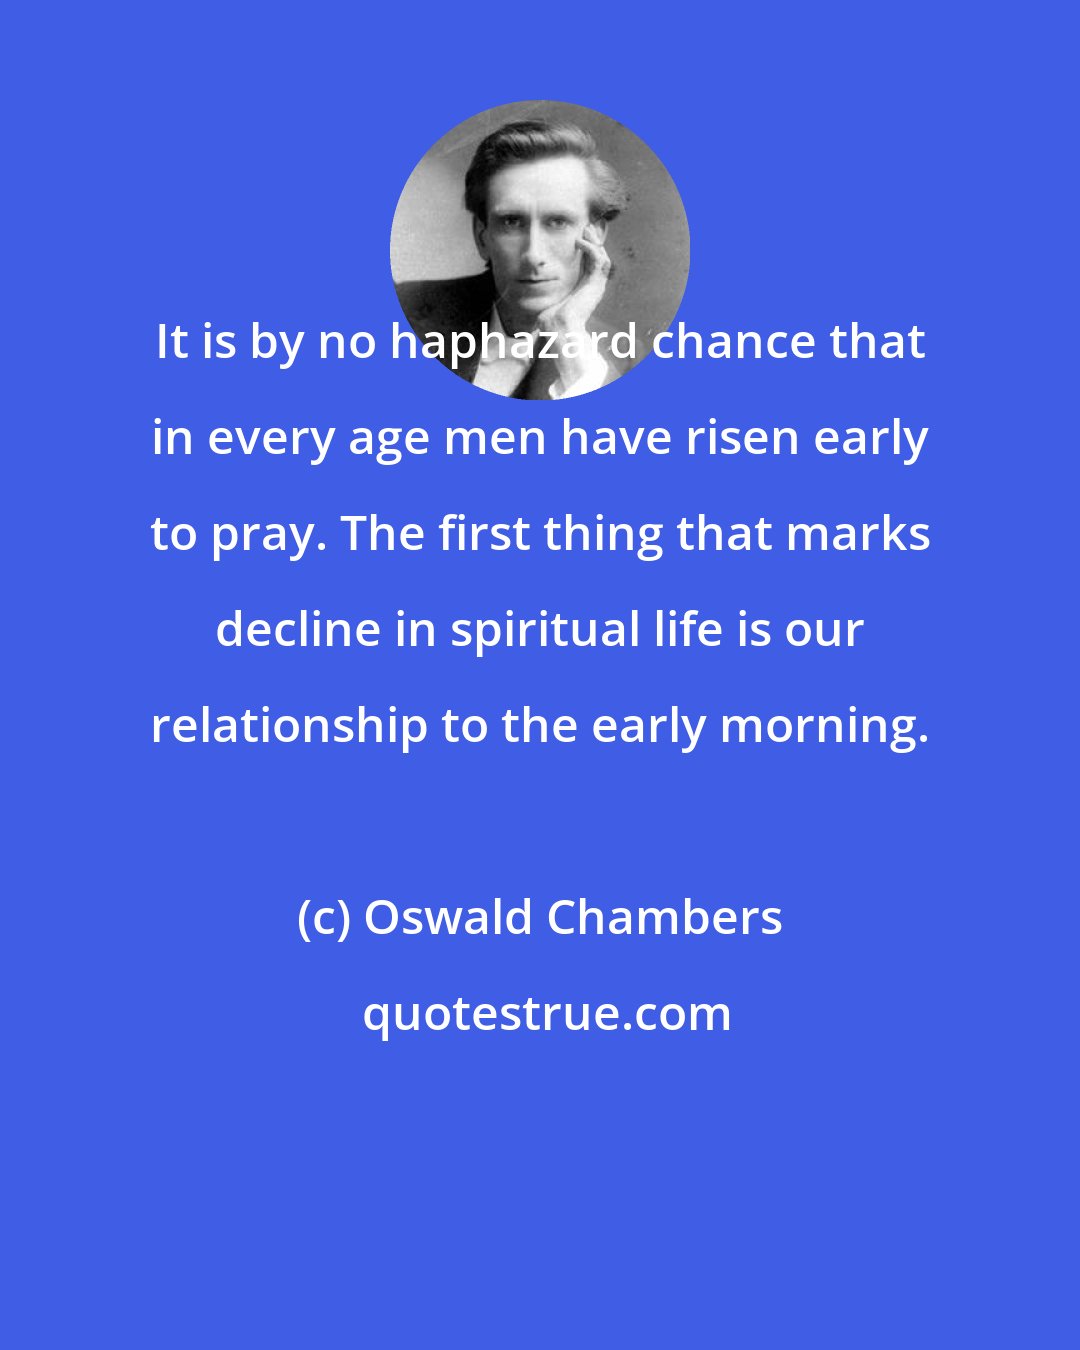 Oswald Chambers: It is by no haphazard chance that in every age men have risen early to pray. The first thing that marks decline in spiritual life is our relationship to the early morning.